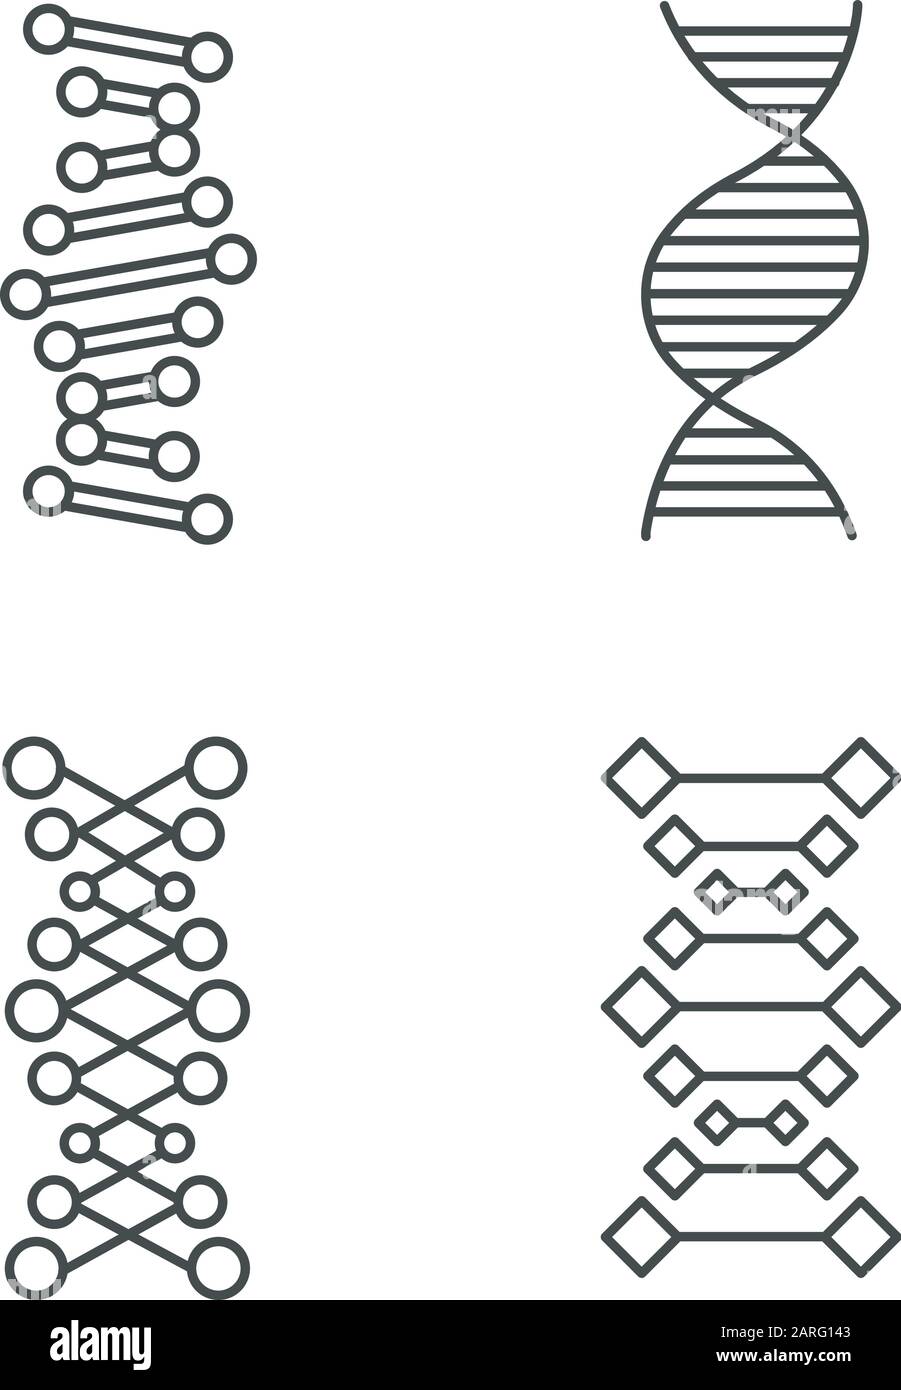 DNA chains linear icons set. Deoxyribonucleic, nucleic acid helix. Molecular biology. Genetic code. Genetics. Thin line contour symbols. Isolated vect Stock Vector